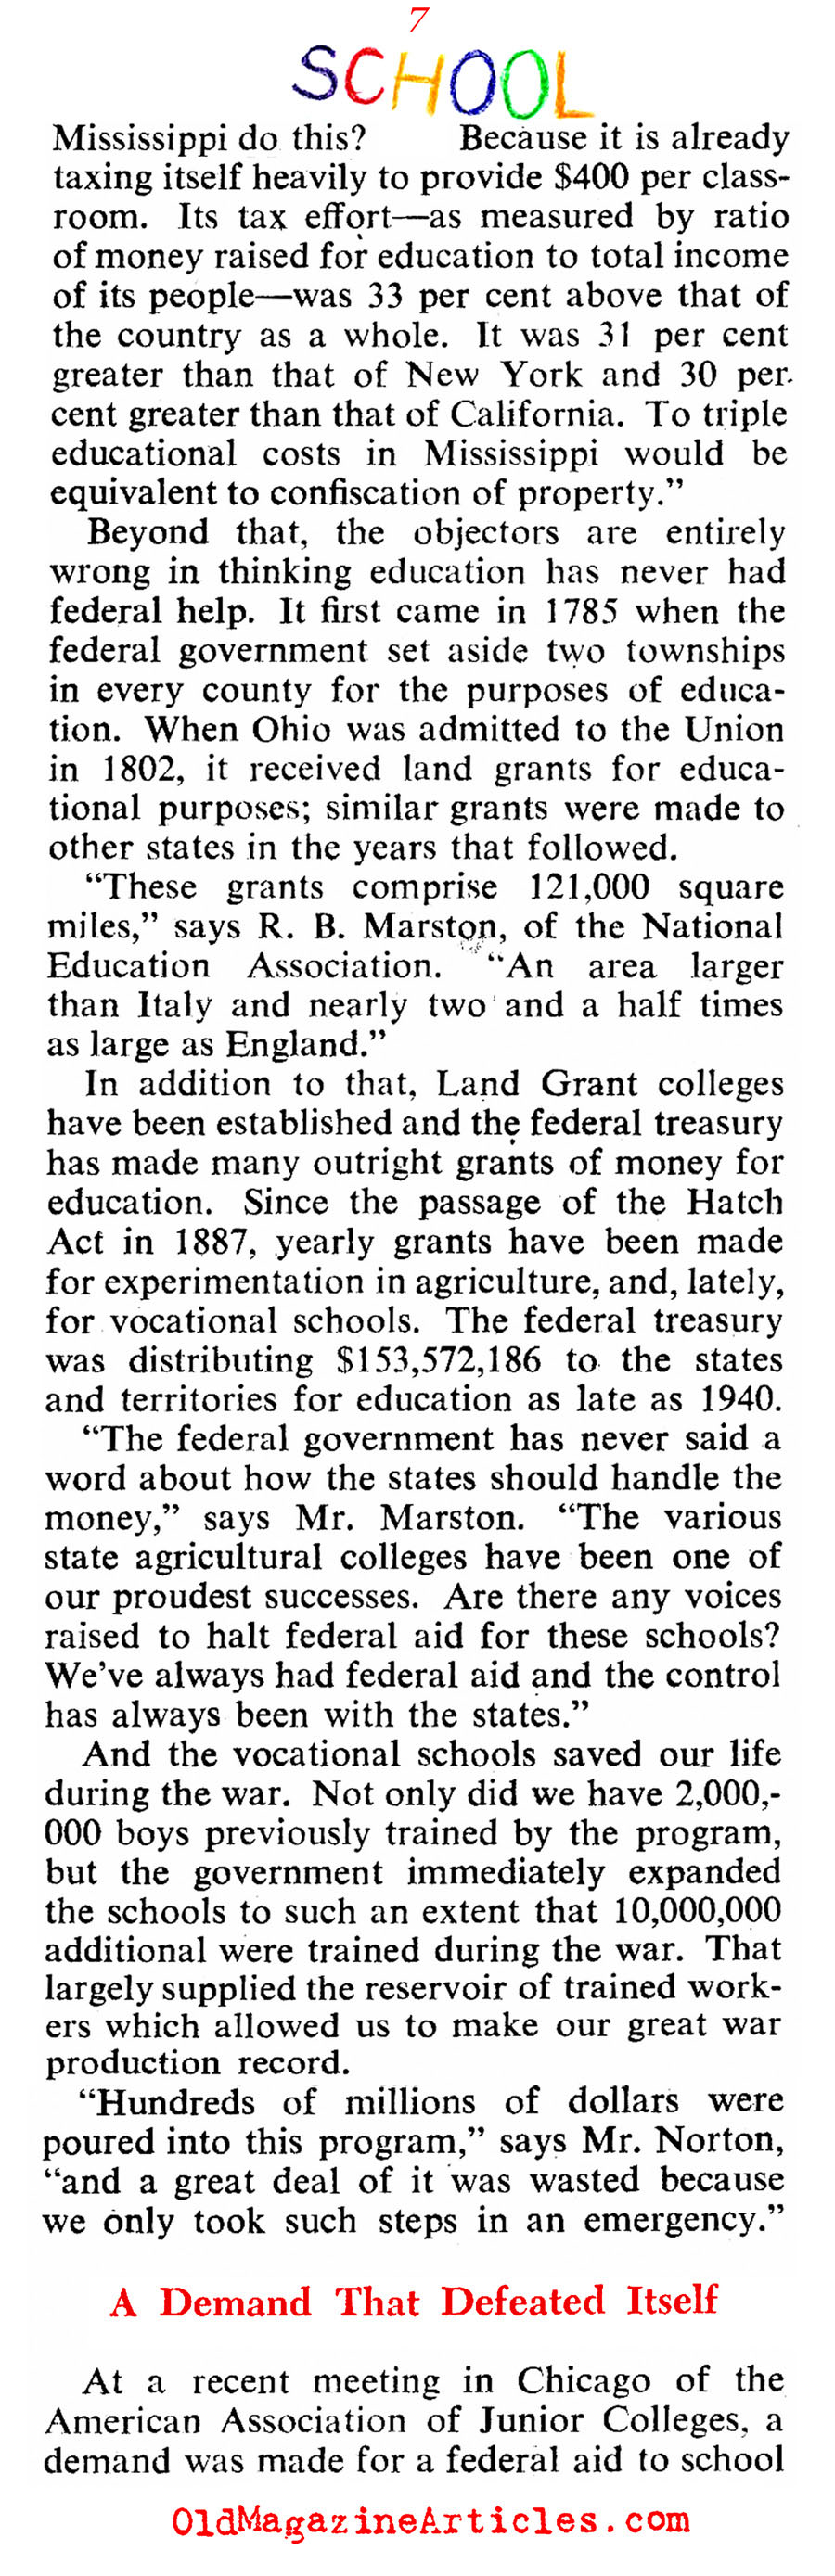 ''Our Schools Are A Scandal'' (Collier's Magazine, 1946)